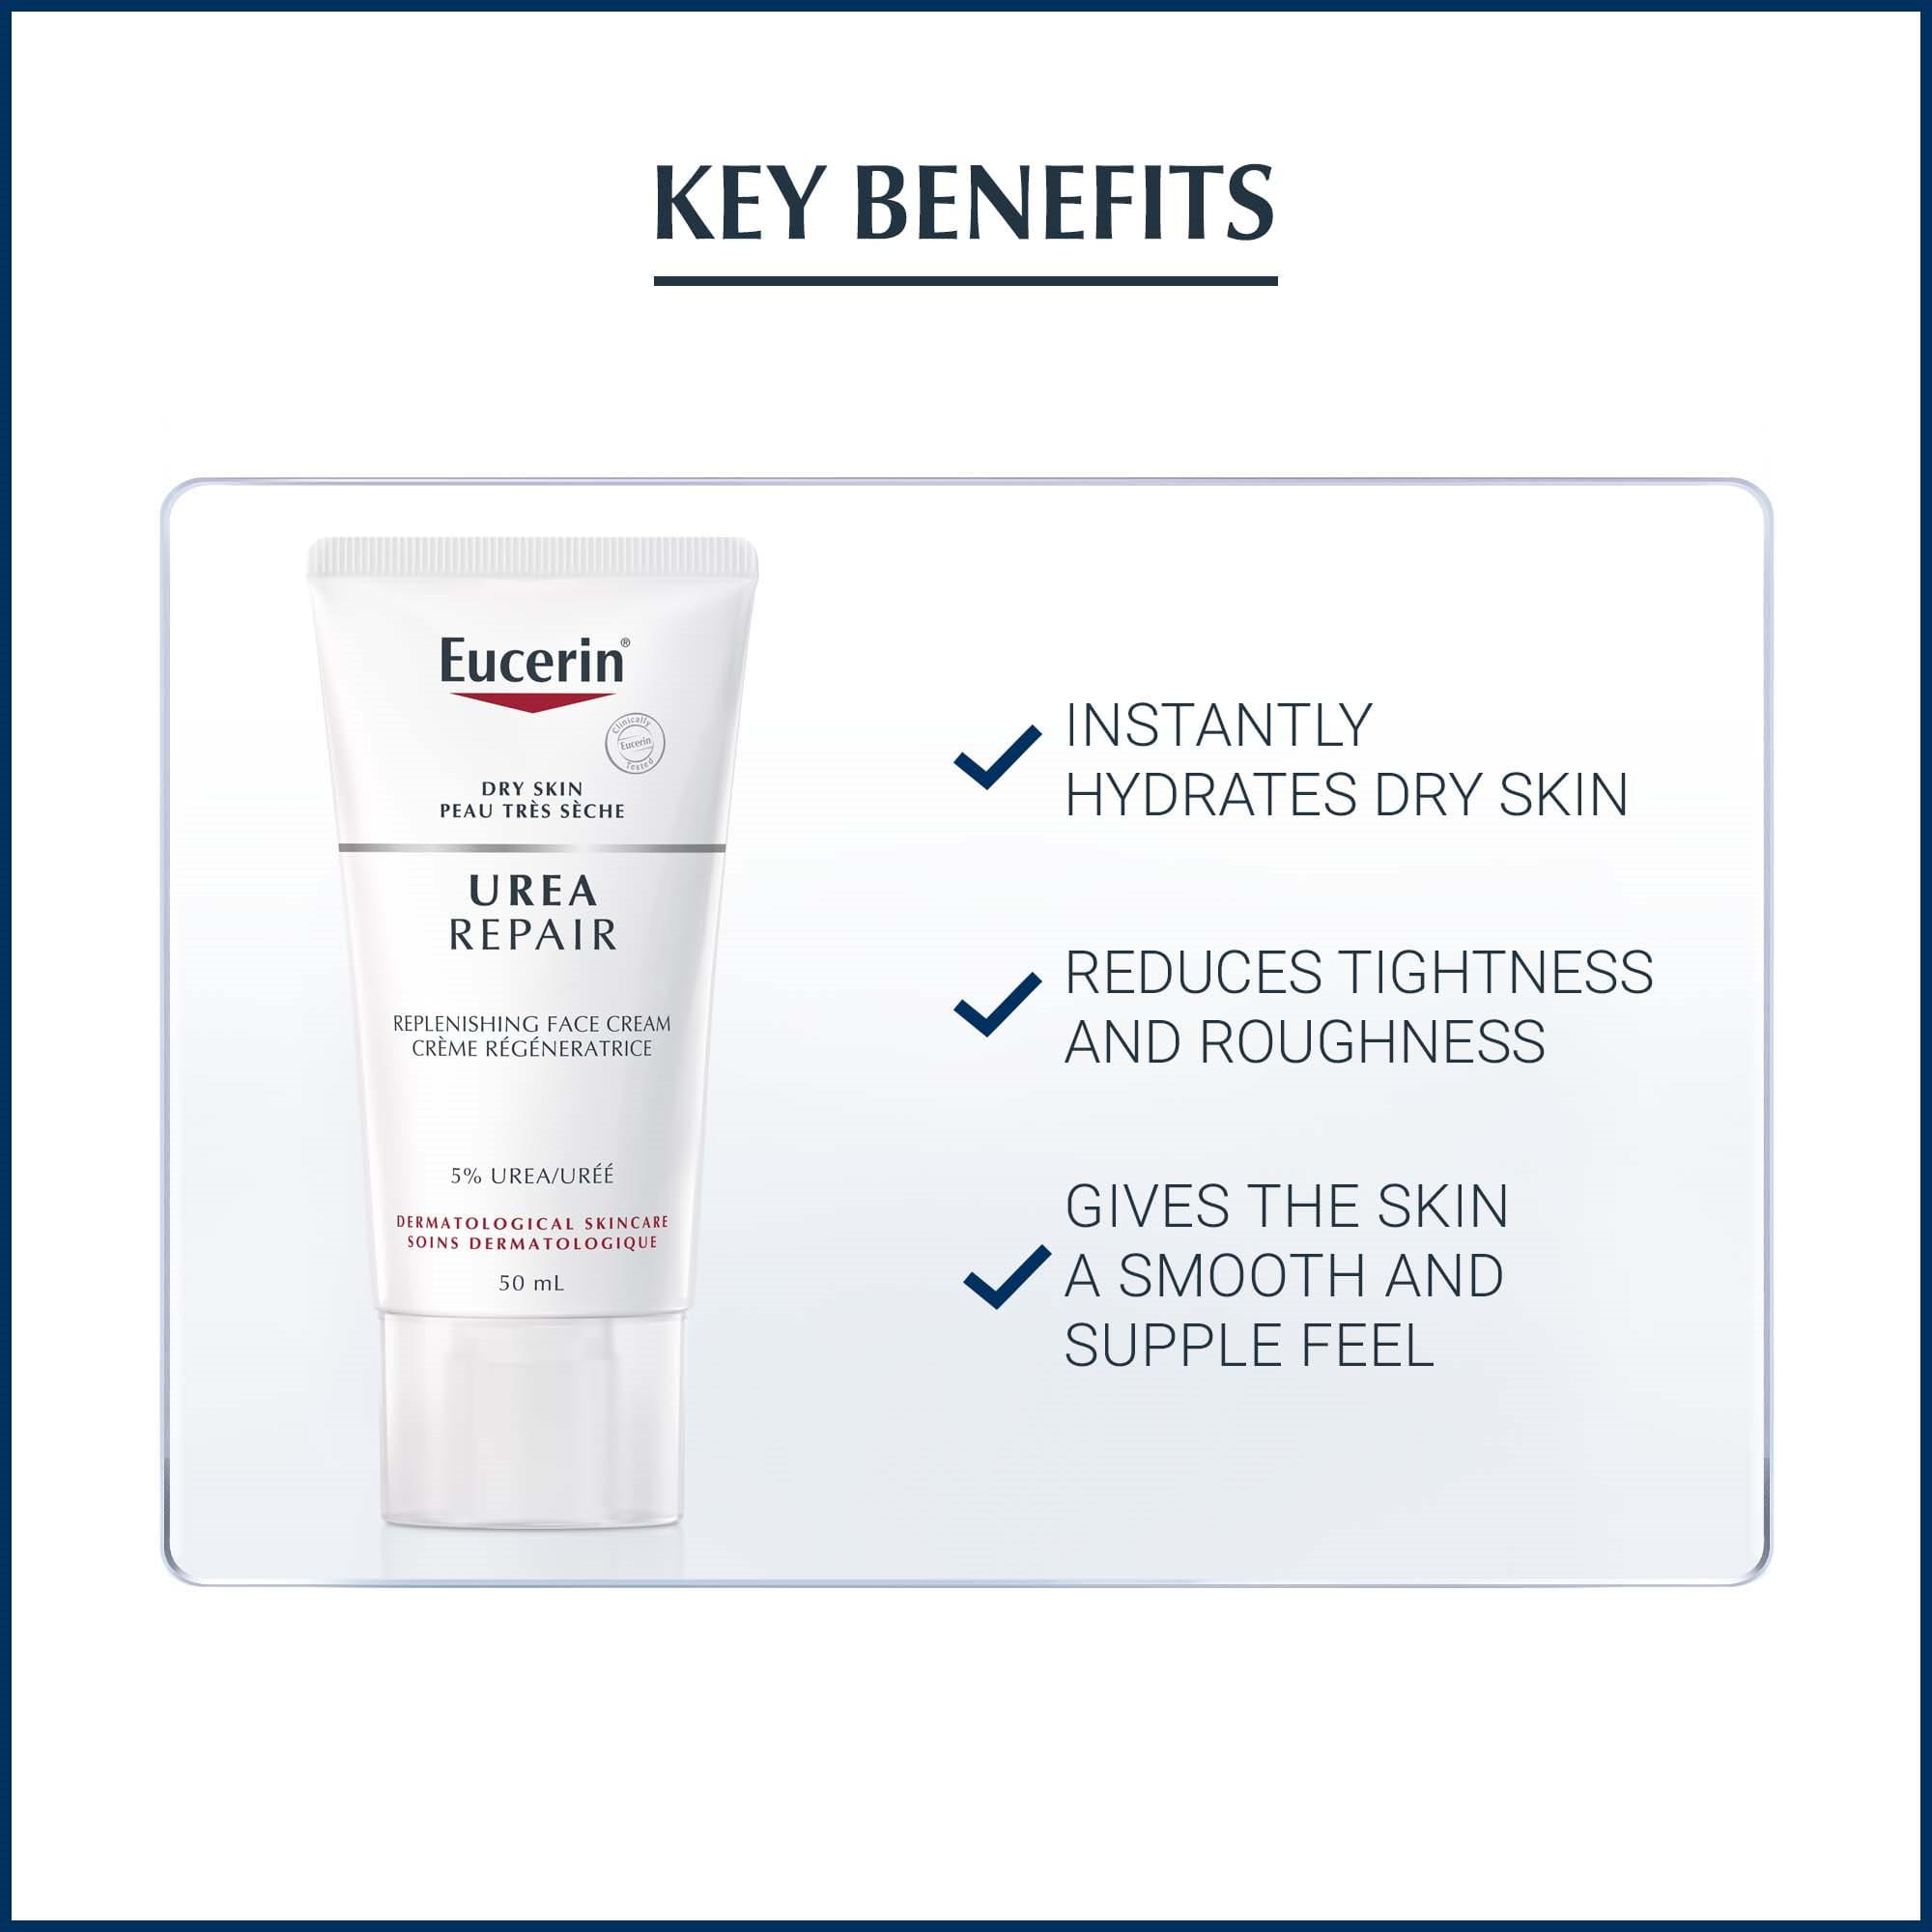 View of Eucerin Urea Repair replenishing face cream product with key benefits text against a white background.